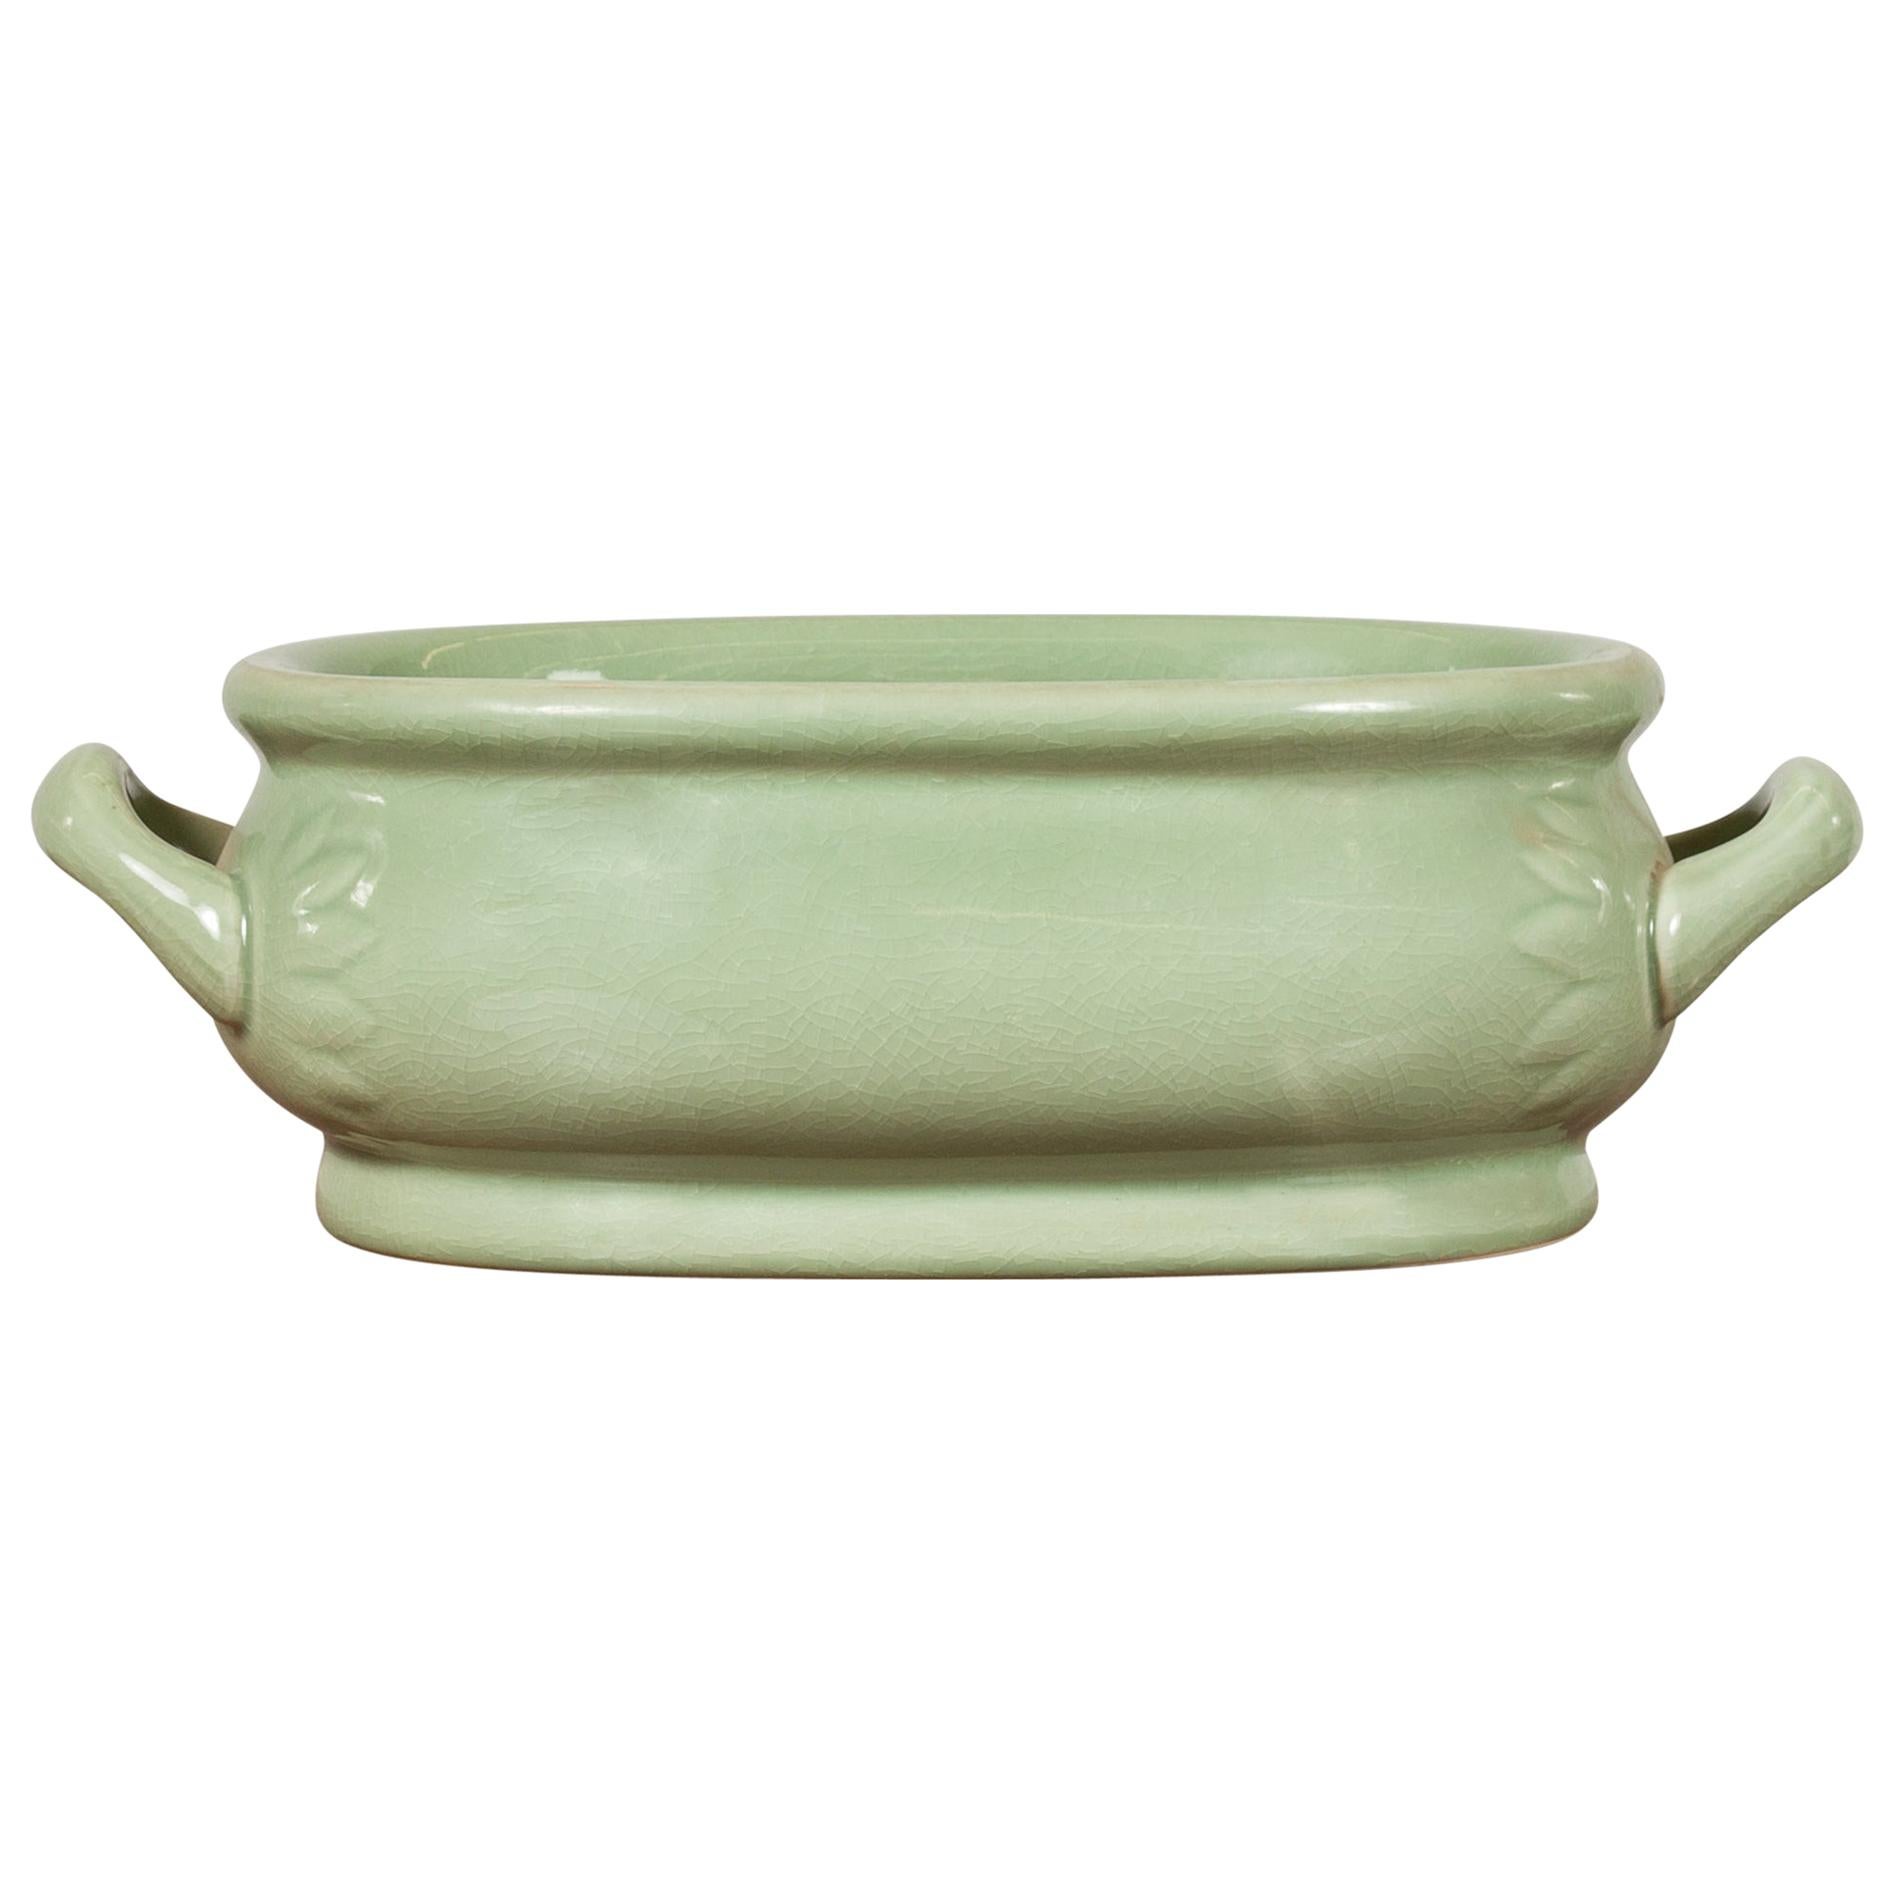 Chinese Vintage Celadon Foot Bath with Two Handles and Foliage Motifs